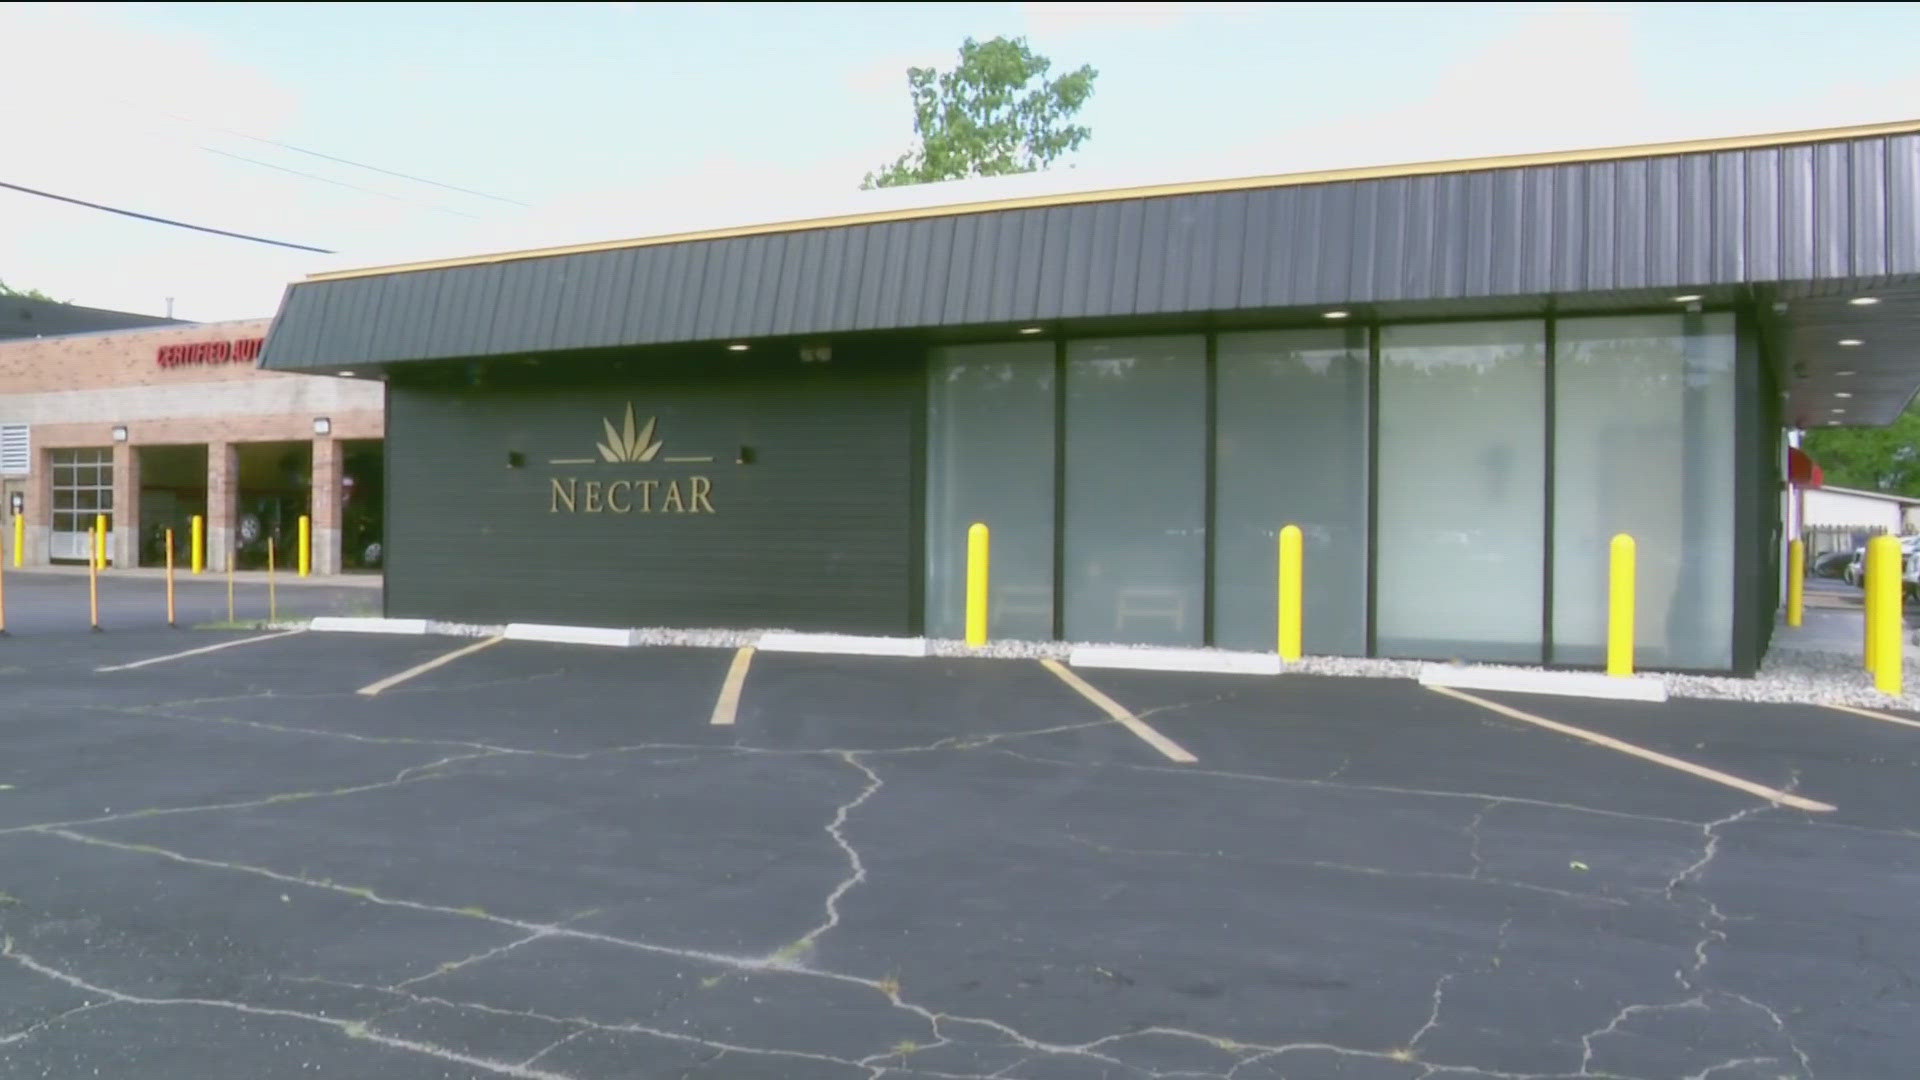 The manager of Nectar on Main Street says the marijuana dispensary has submitted an application to become recreational.